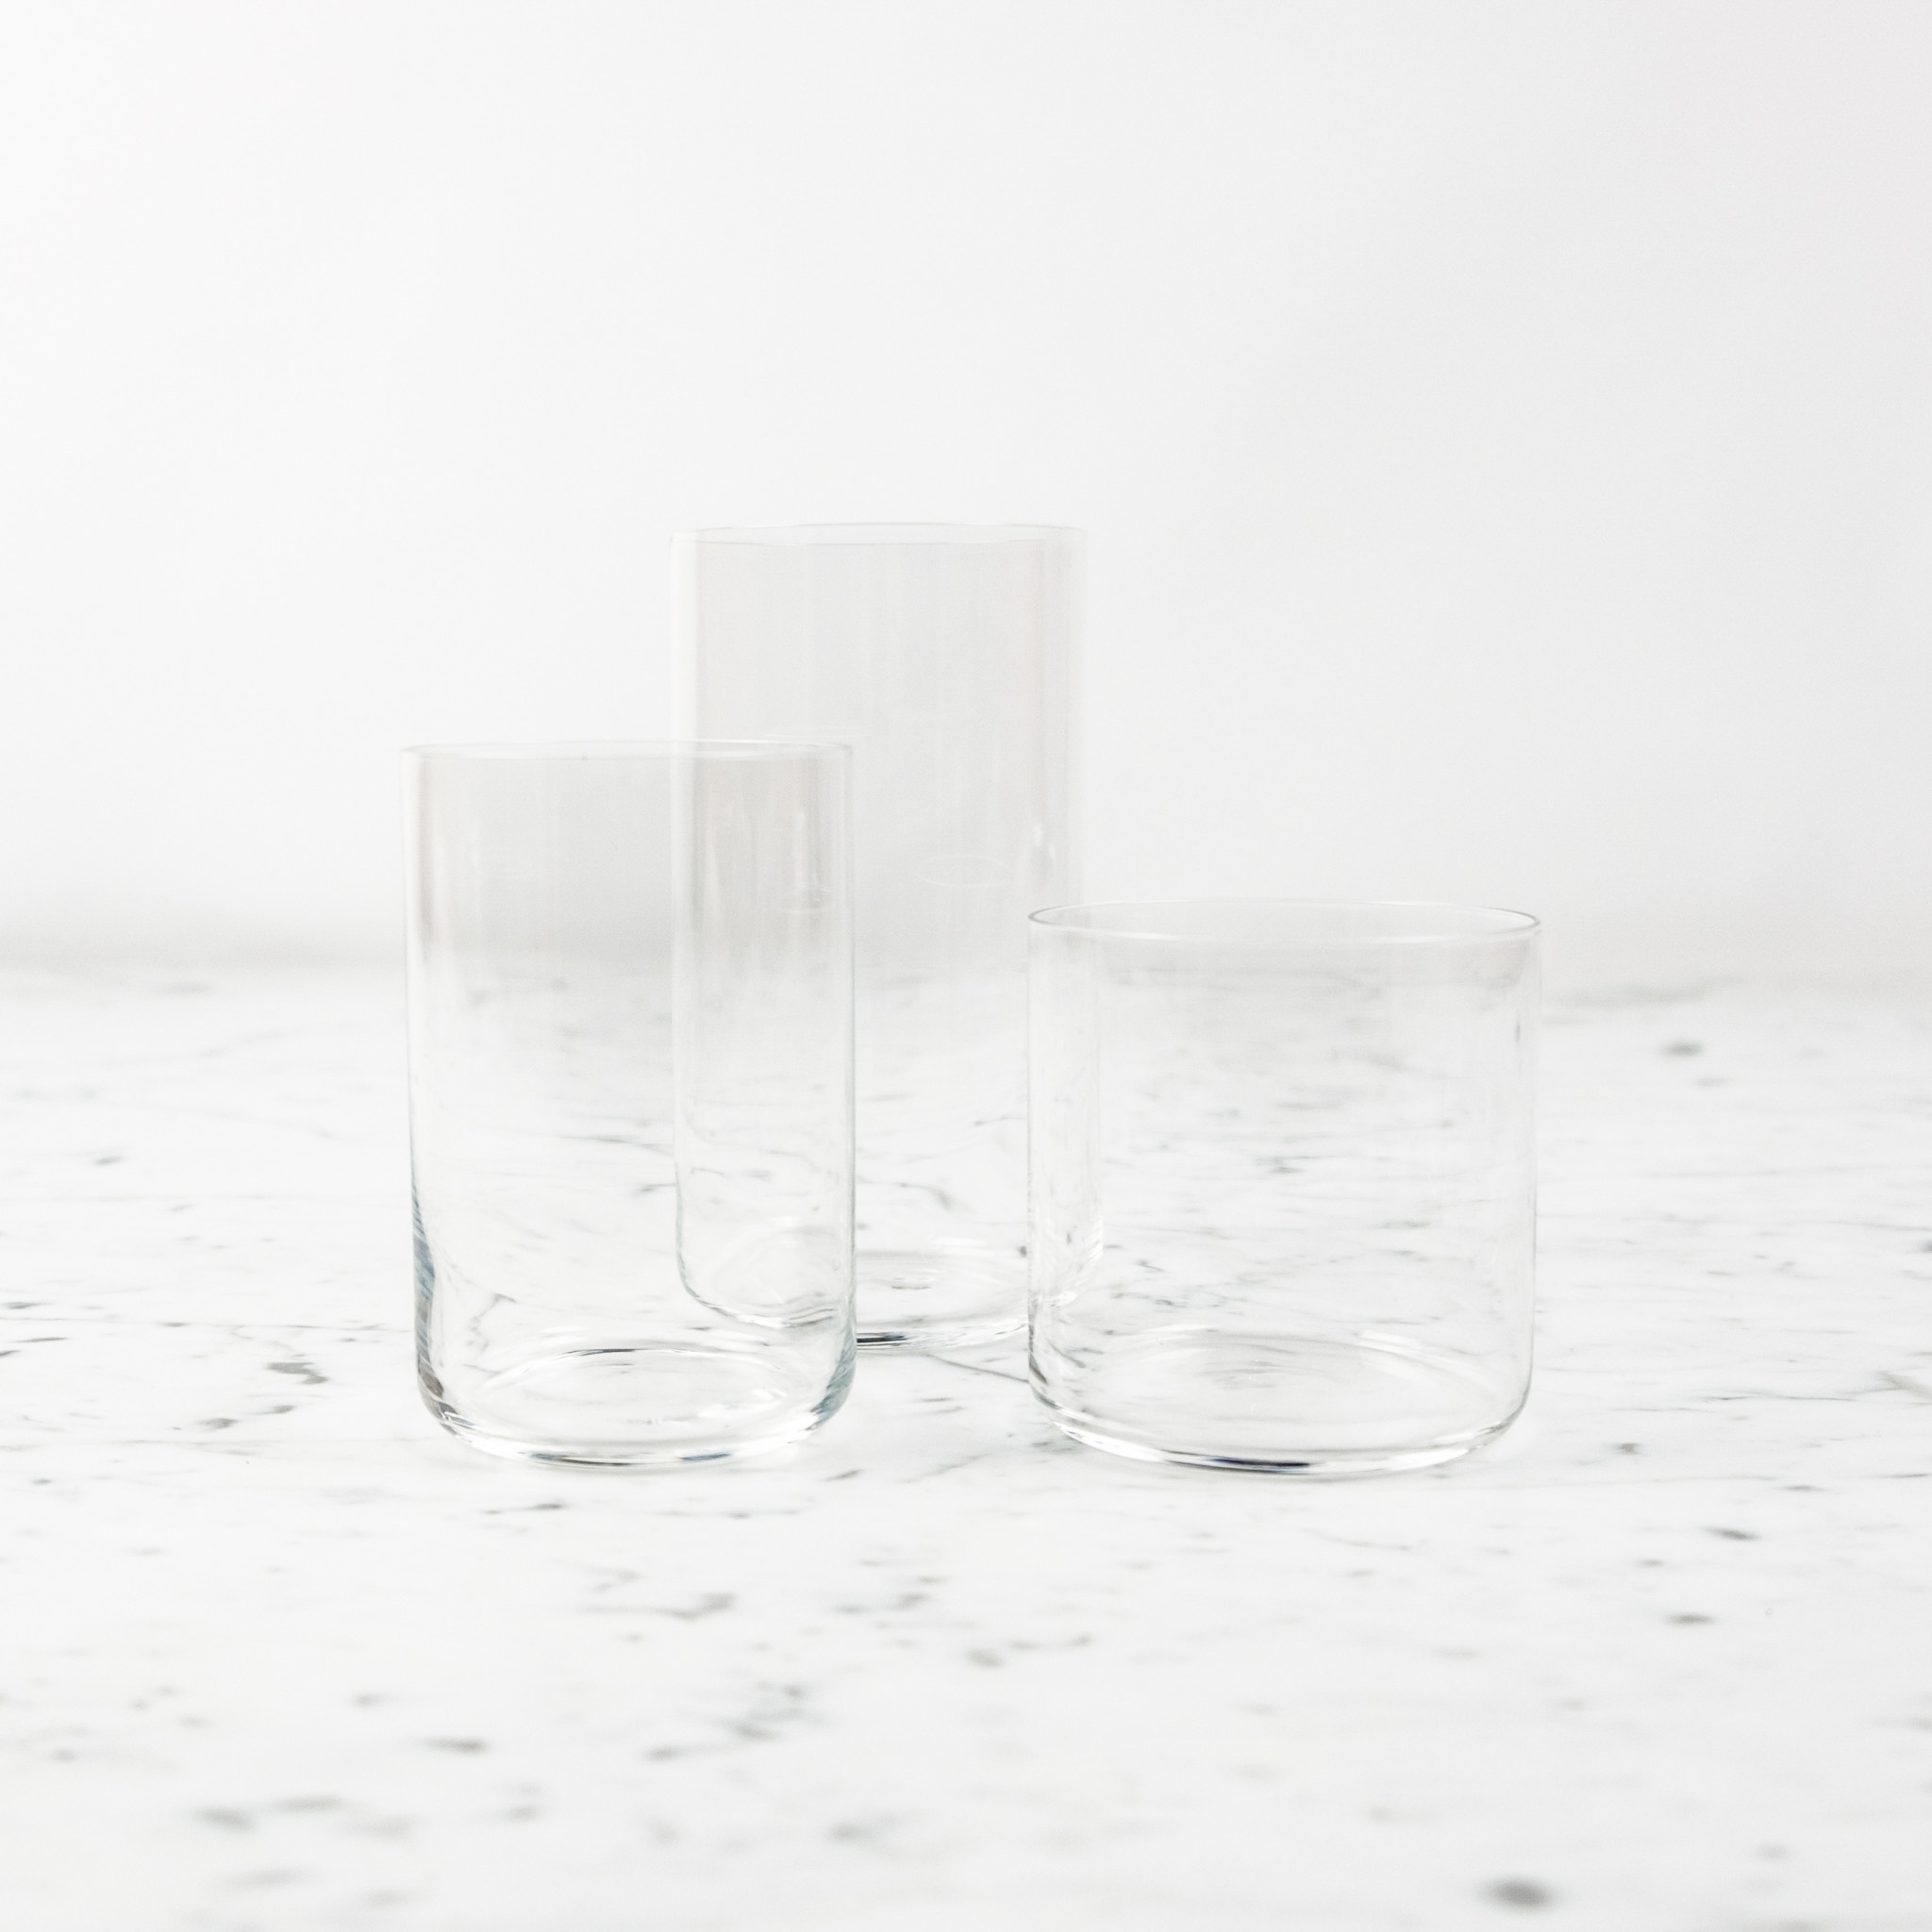 Straight Sided Japanese Modern Juice Tumbler - 16 oz - The Foundry Home  Goods